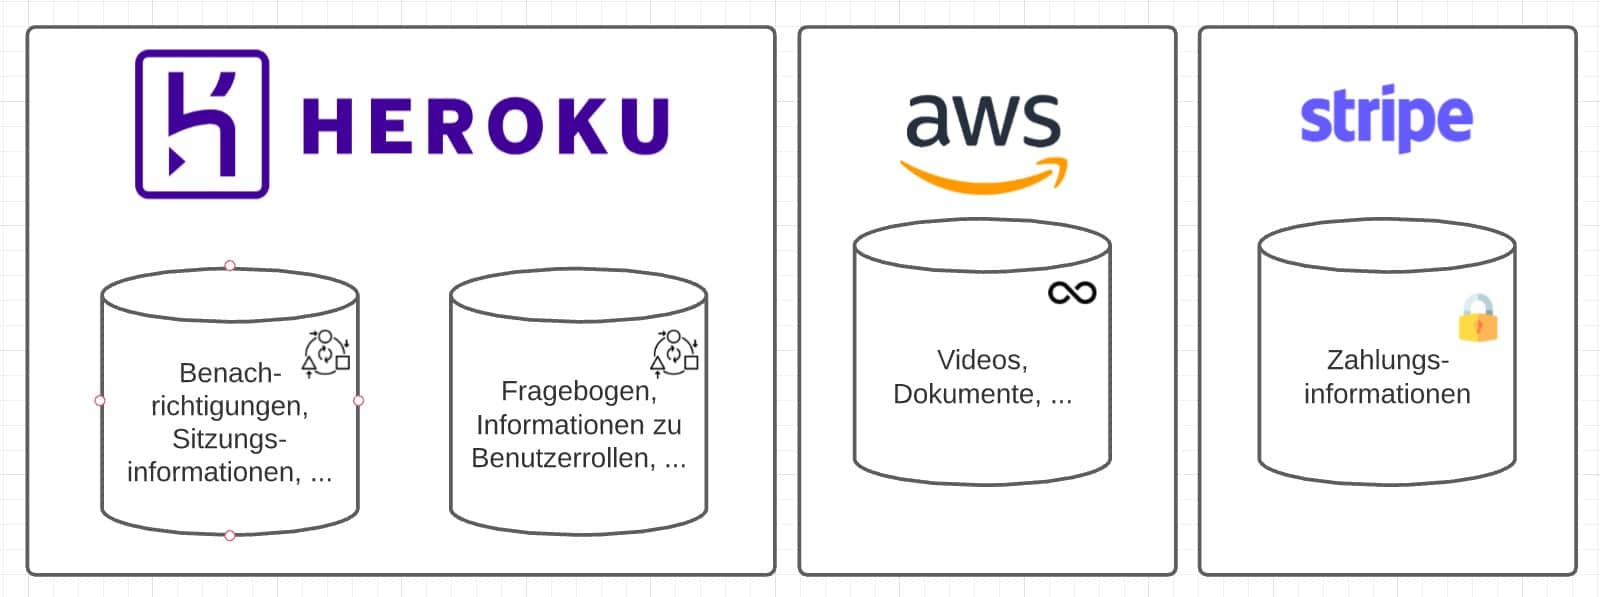 Heroku, AWS, Stripe databases with icons indicating security, capacity and individuality